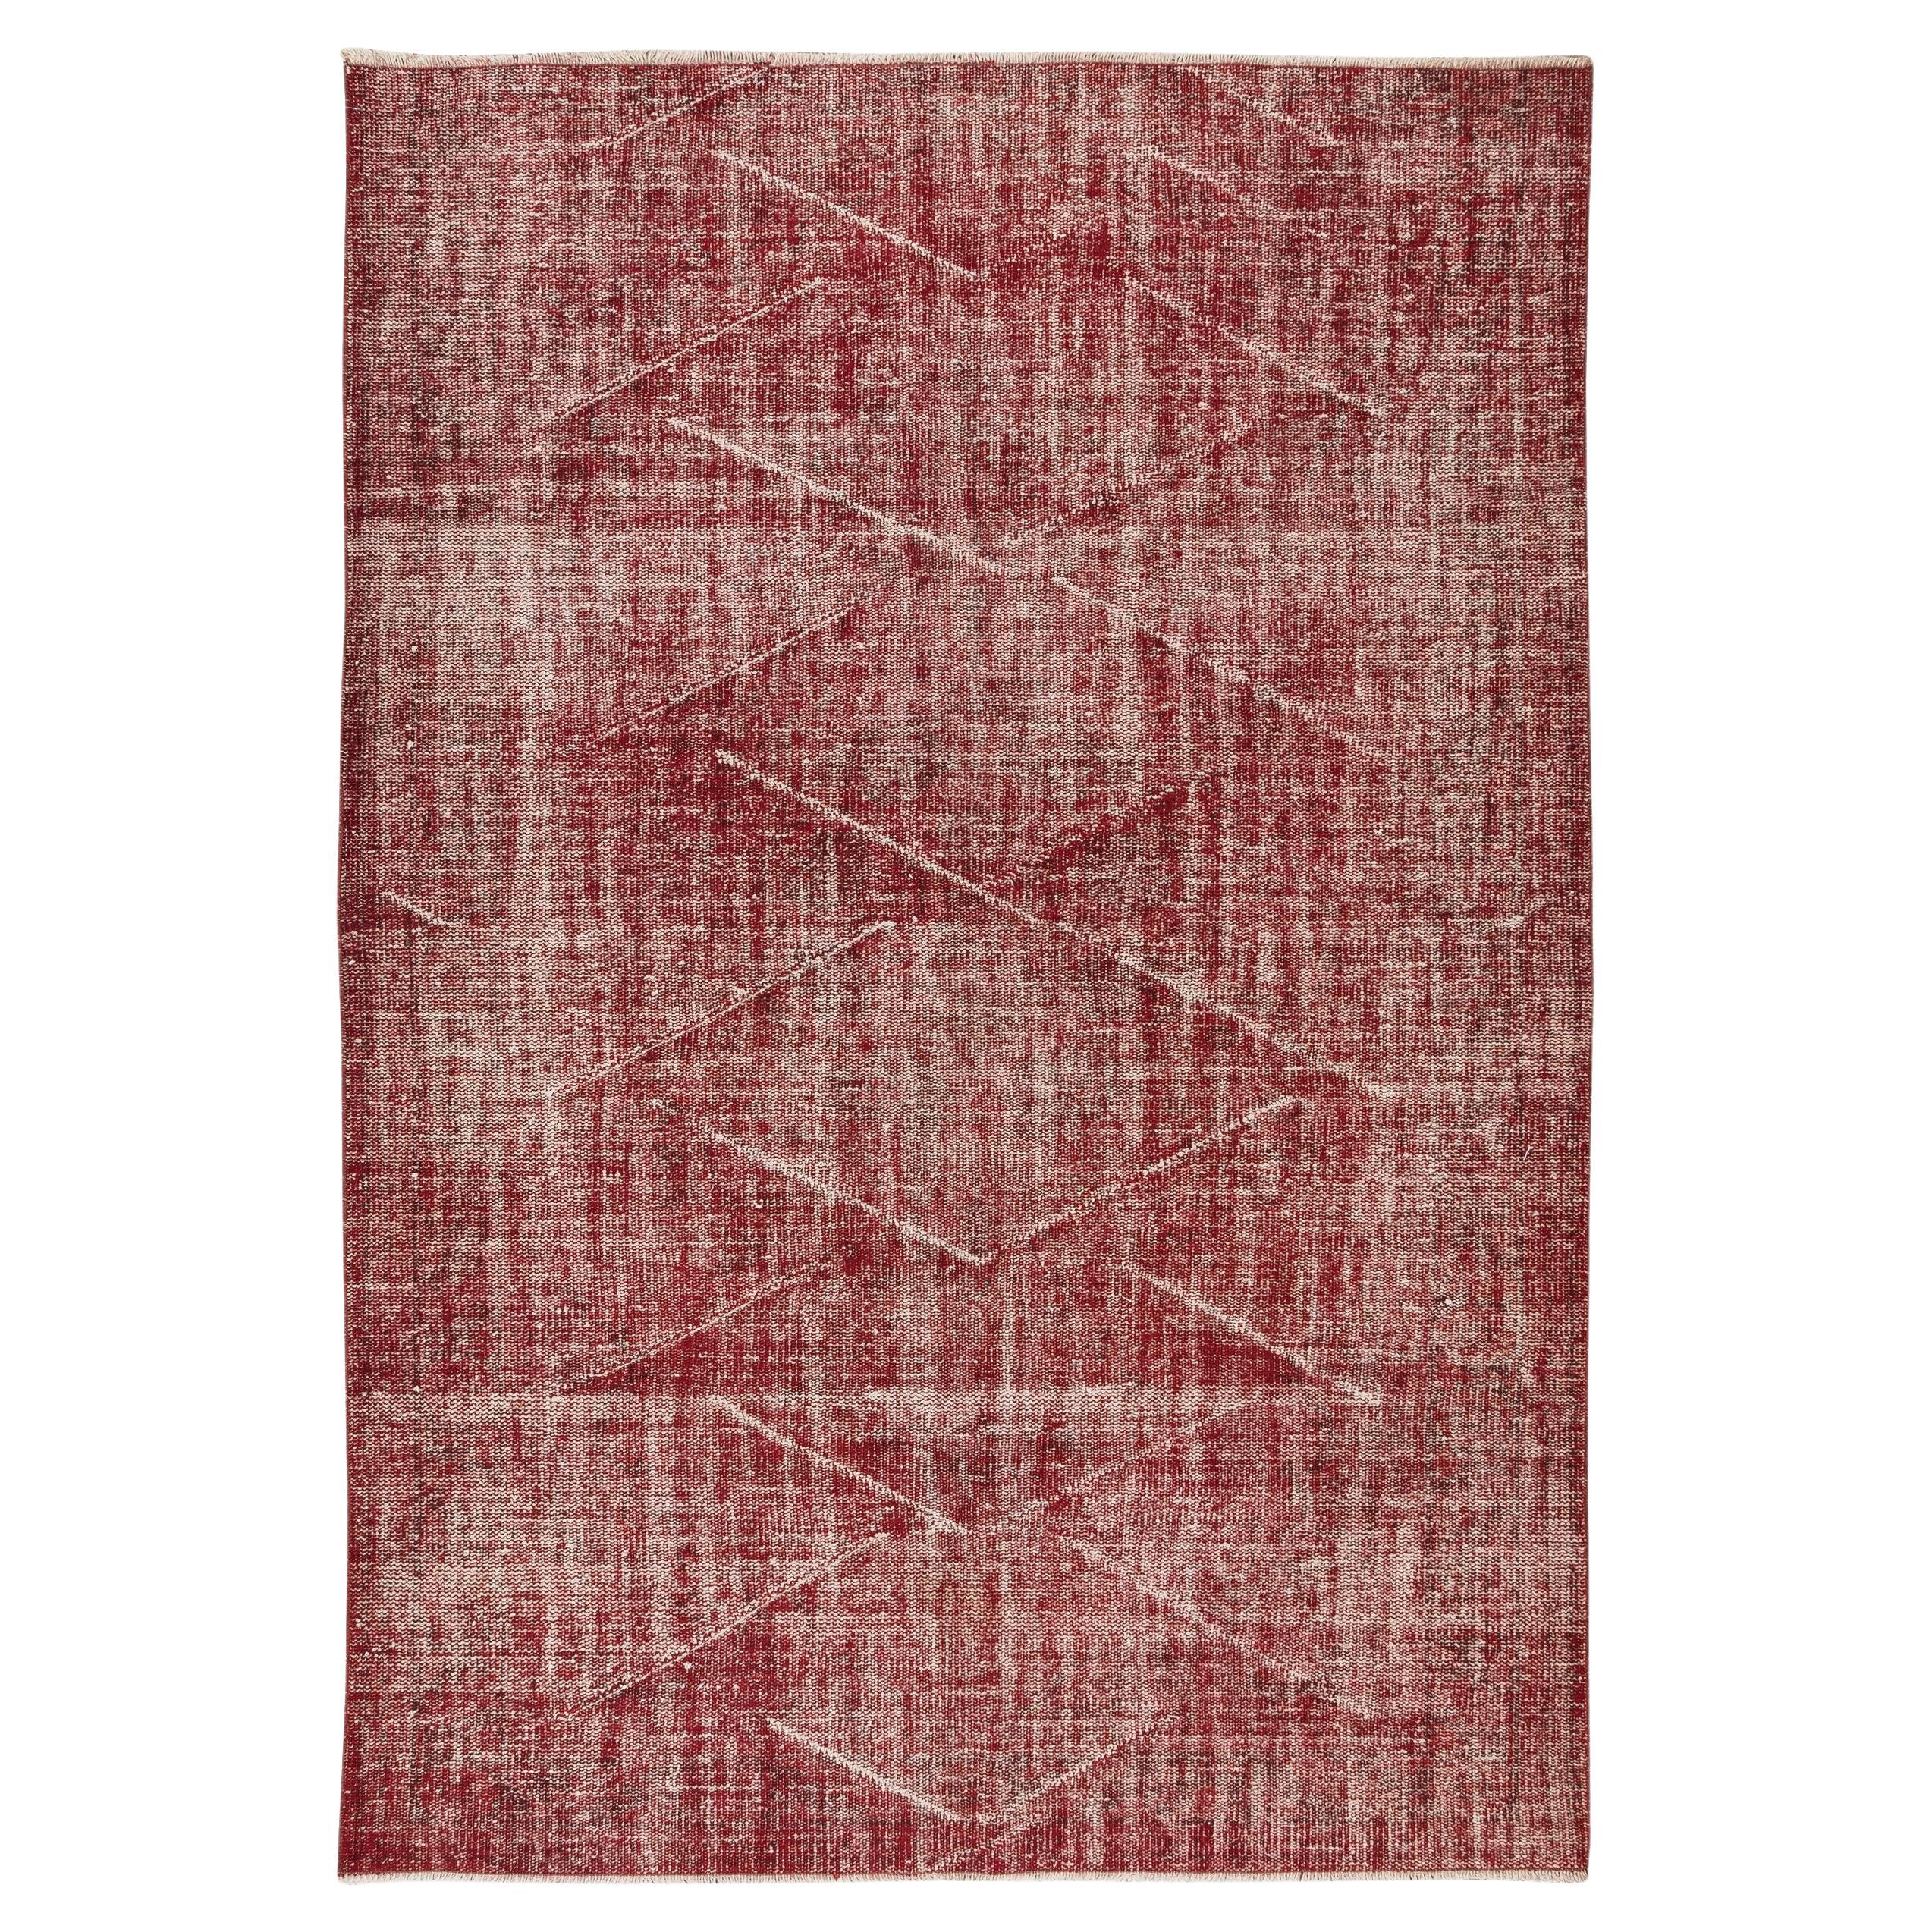 5.7x8 Ft Distressed Mid-20th Century Handmade Turkish Area Rug in Red